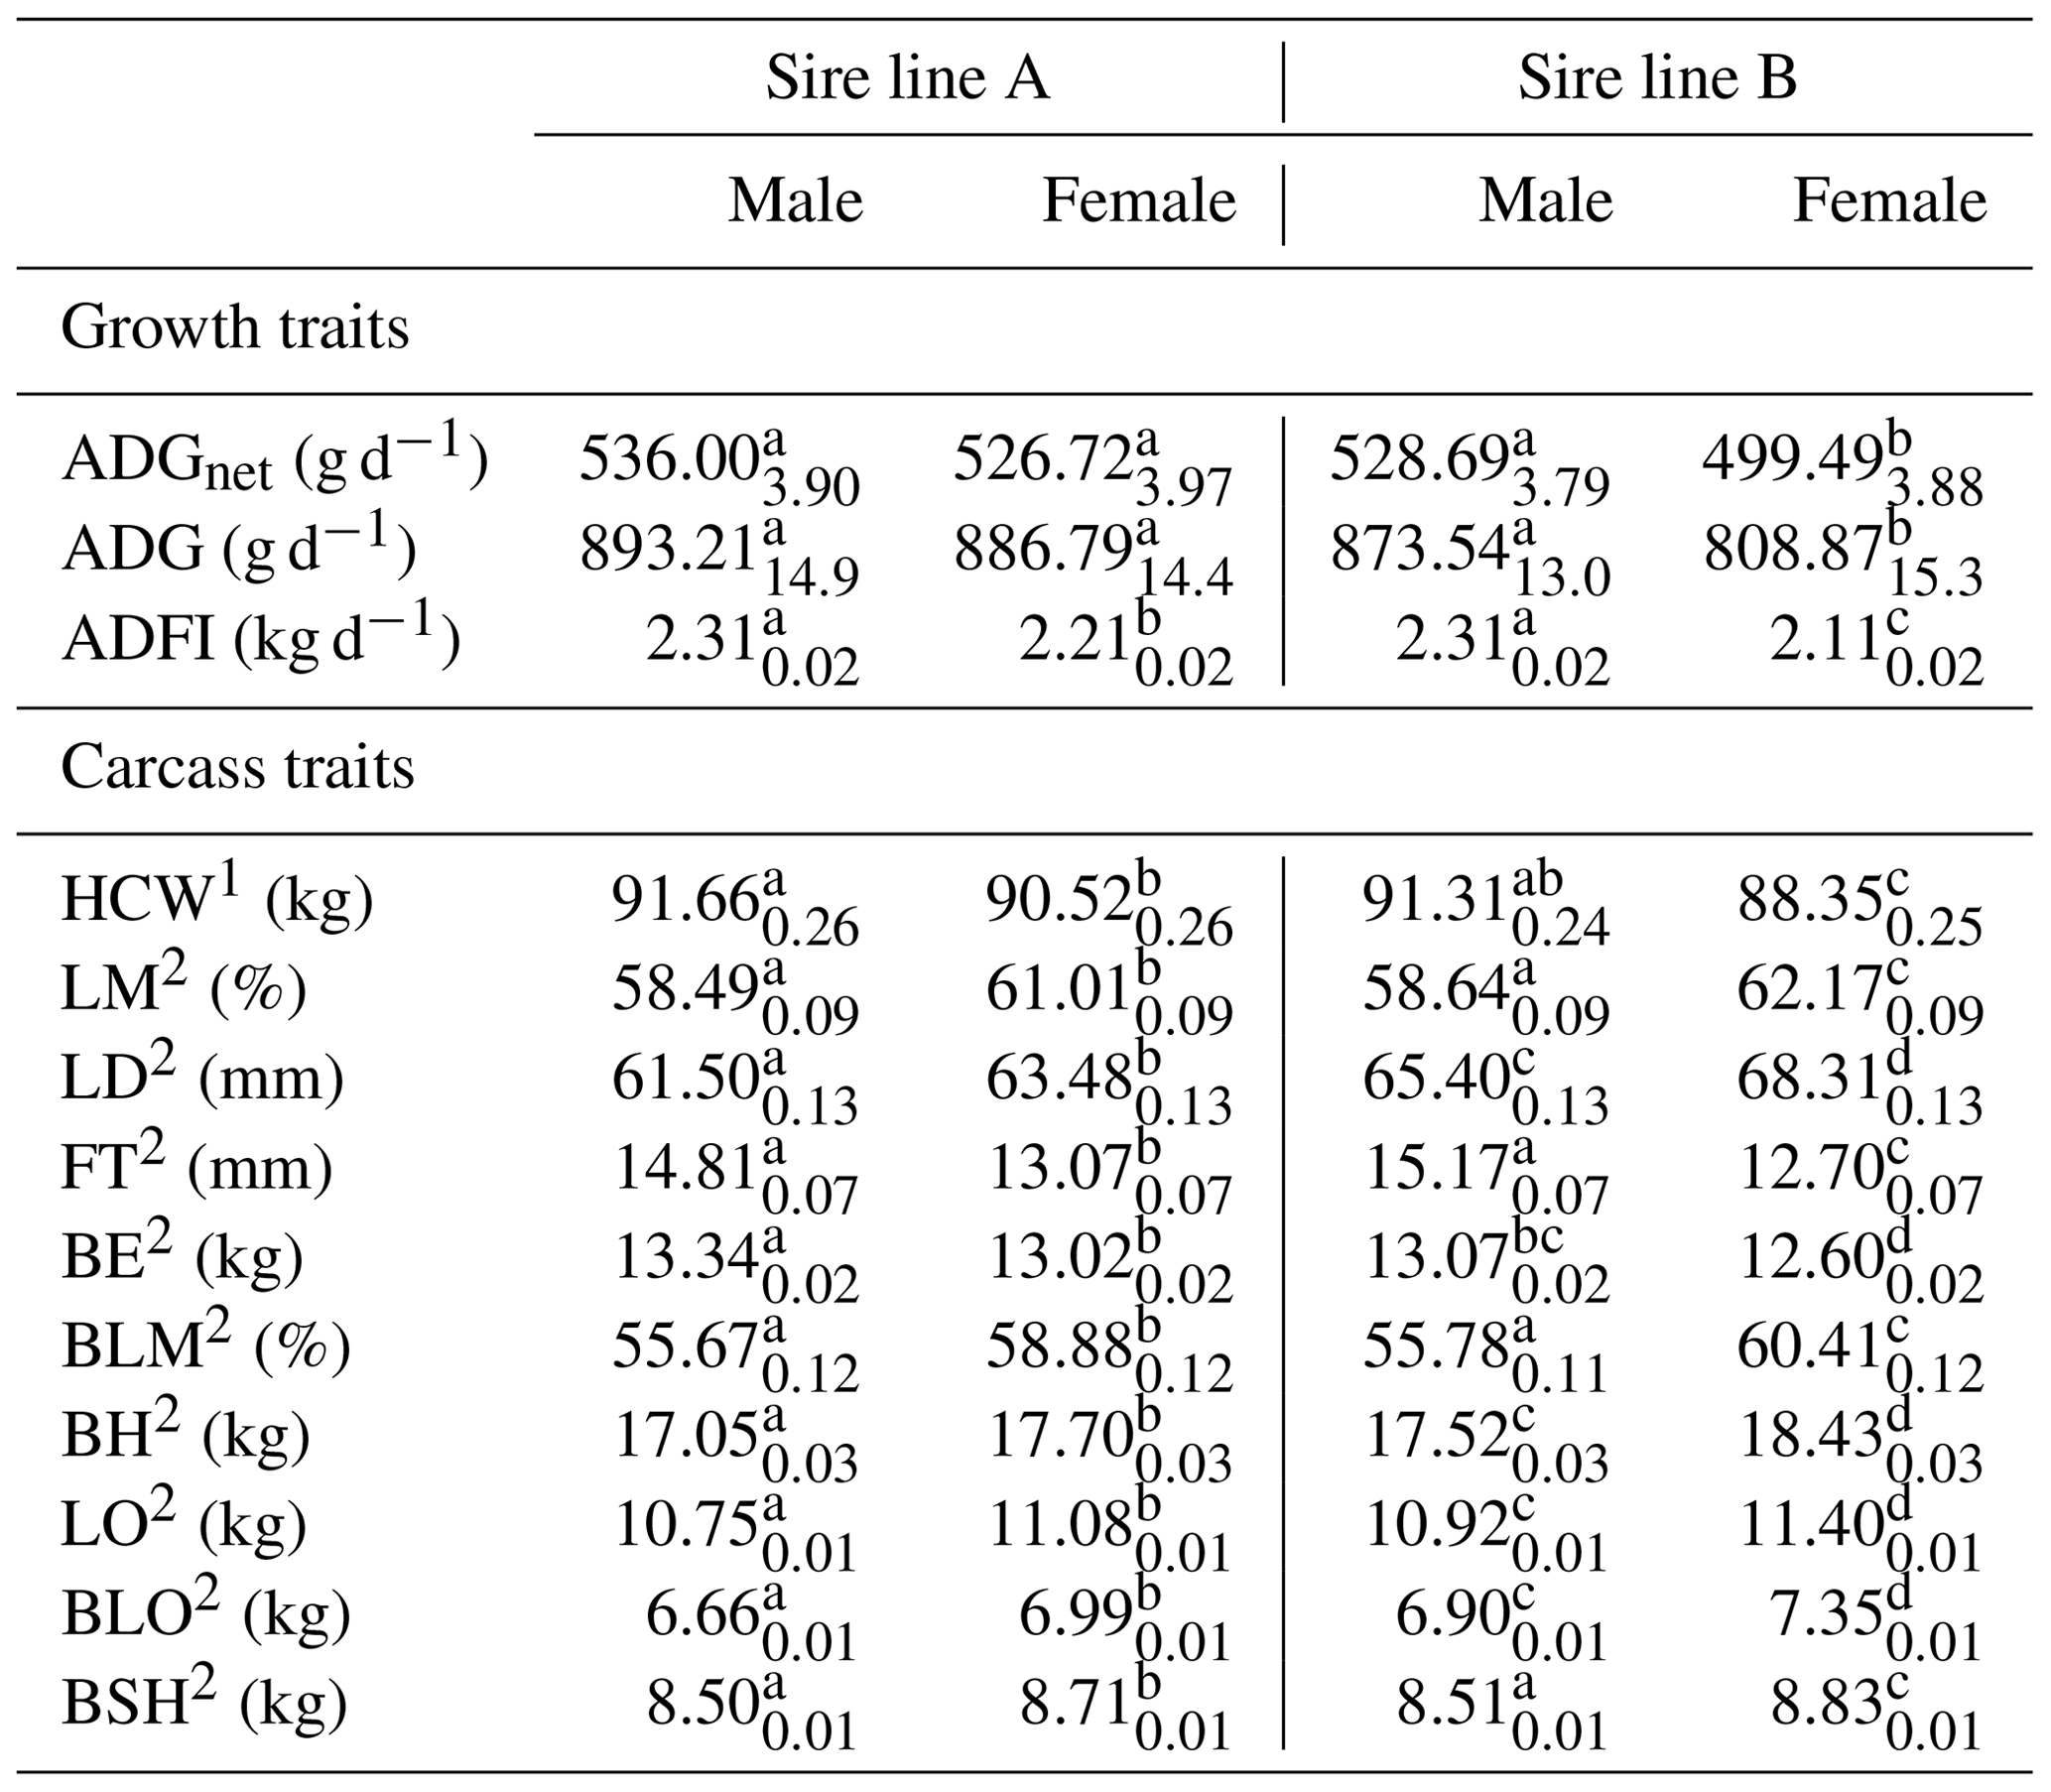 Aab Effects Of Sire Line Birth Weight And Sex On Growth Performance And Carcass Traits Of 8355